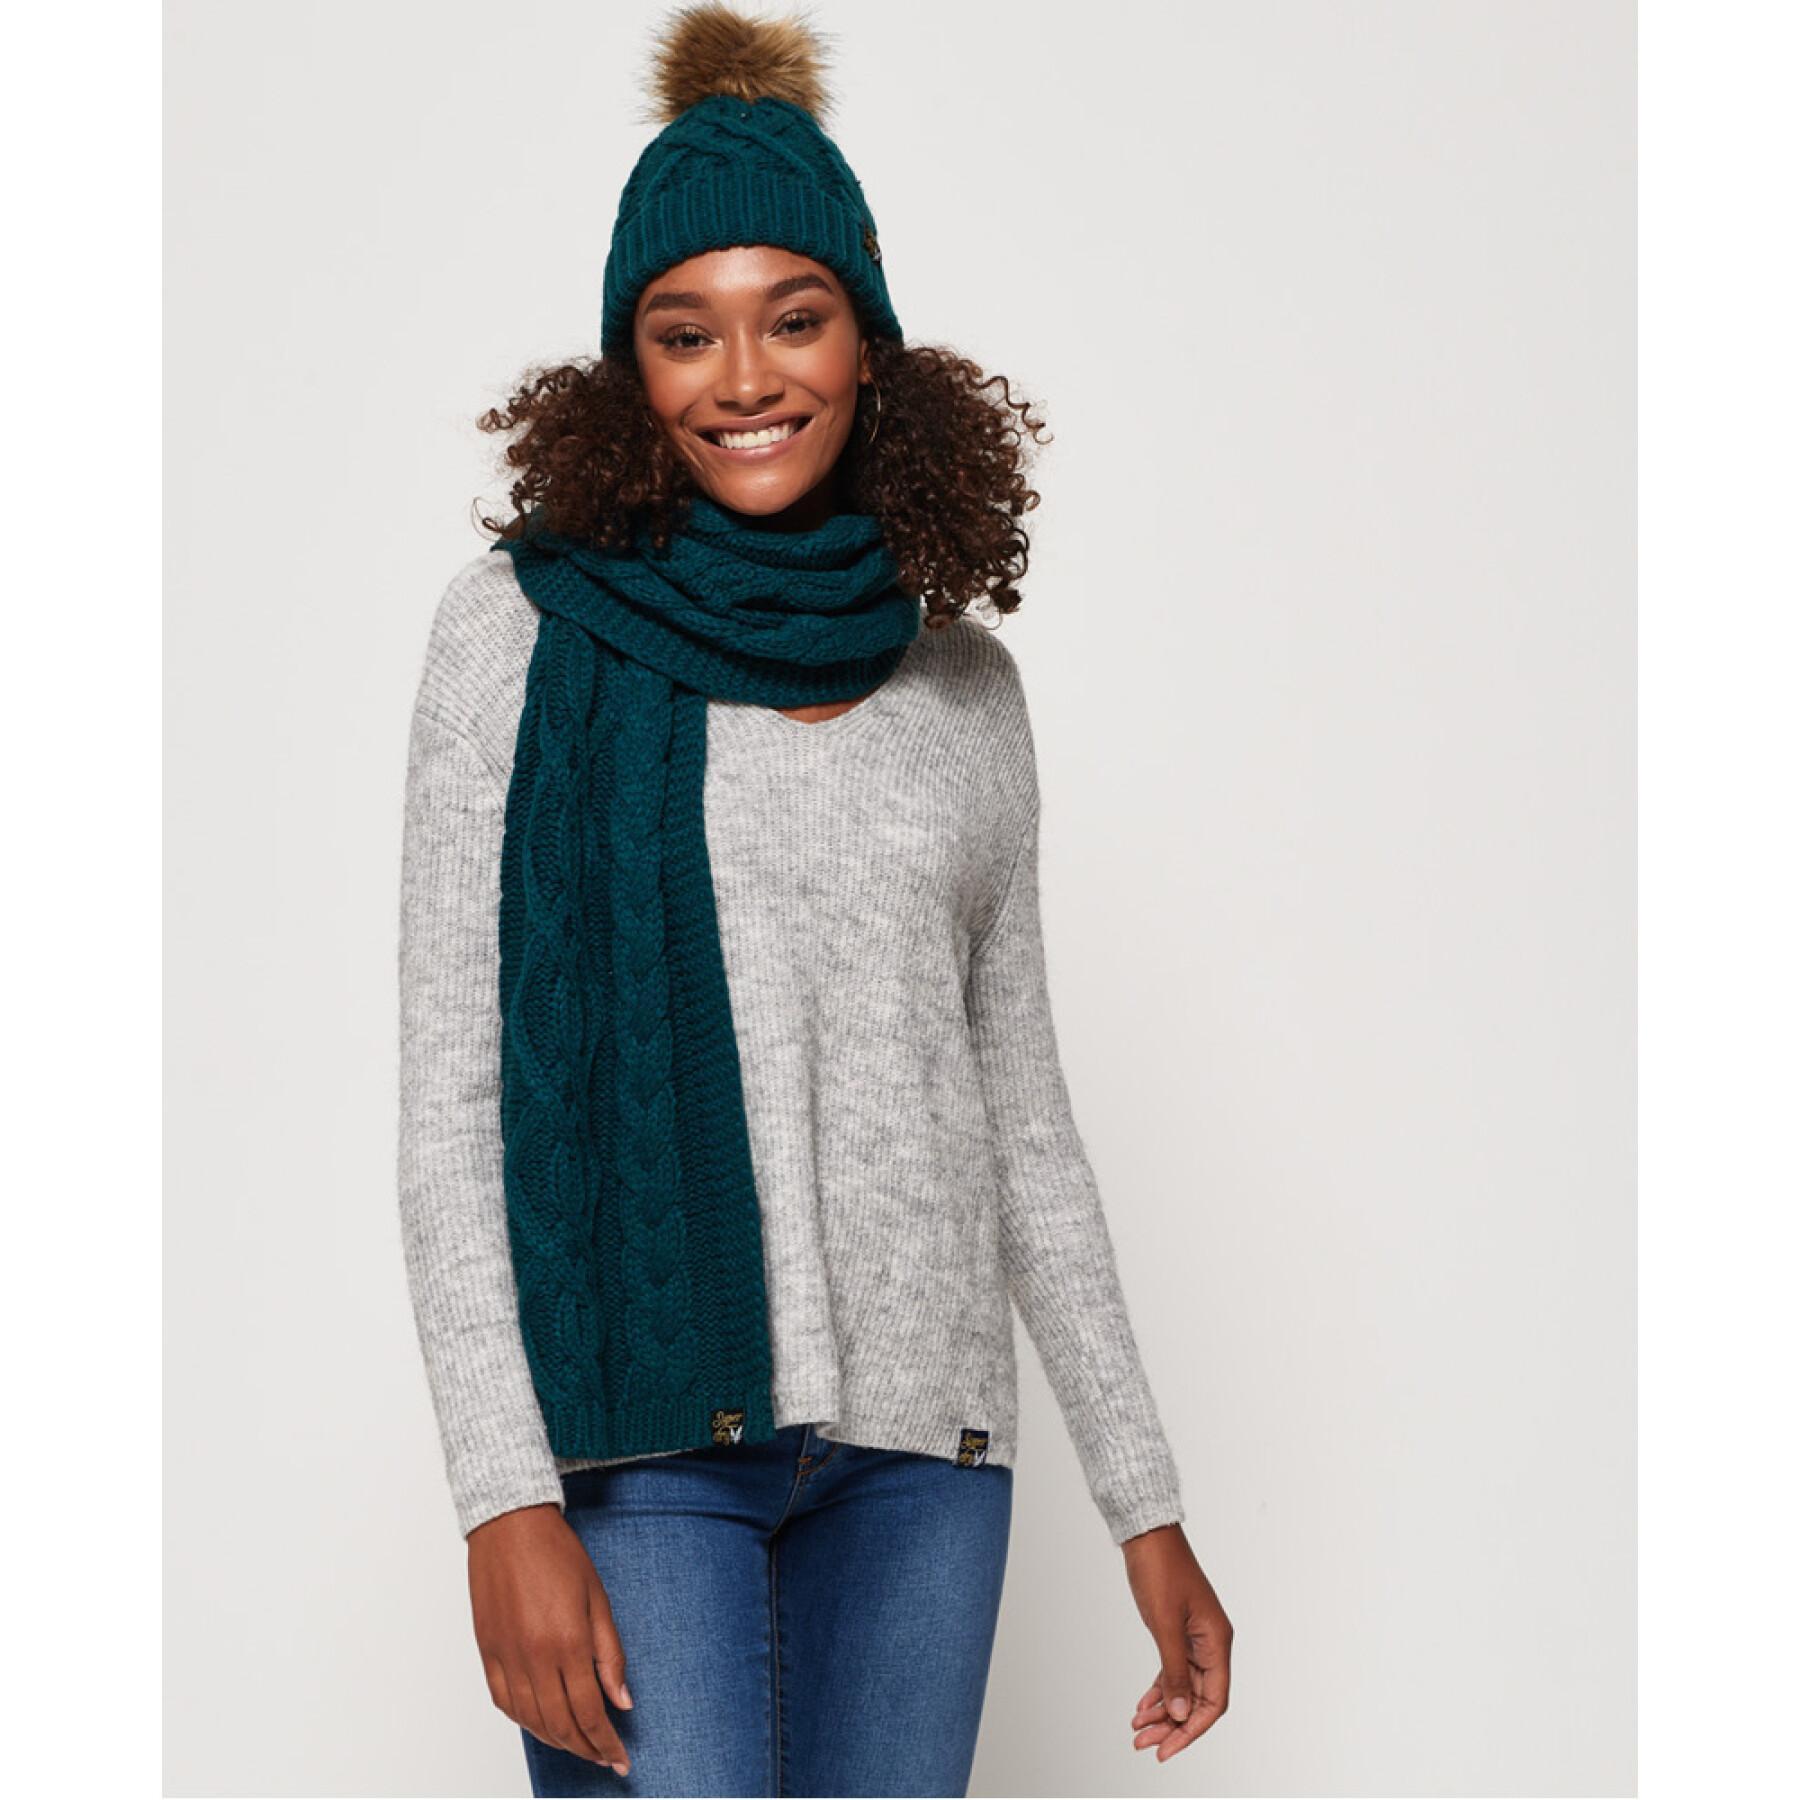 Women's cable knit scarf Superdry Arizona